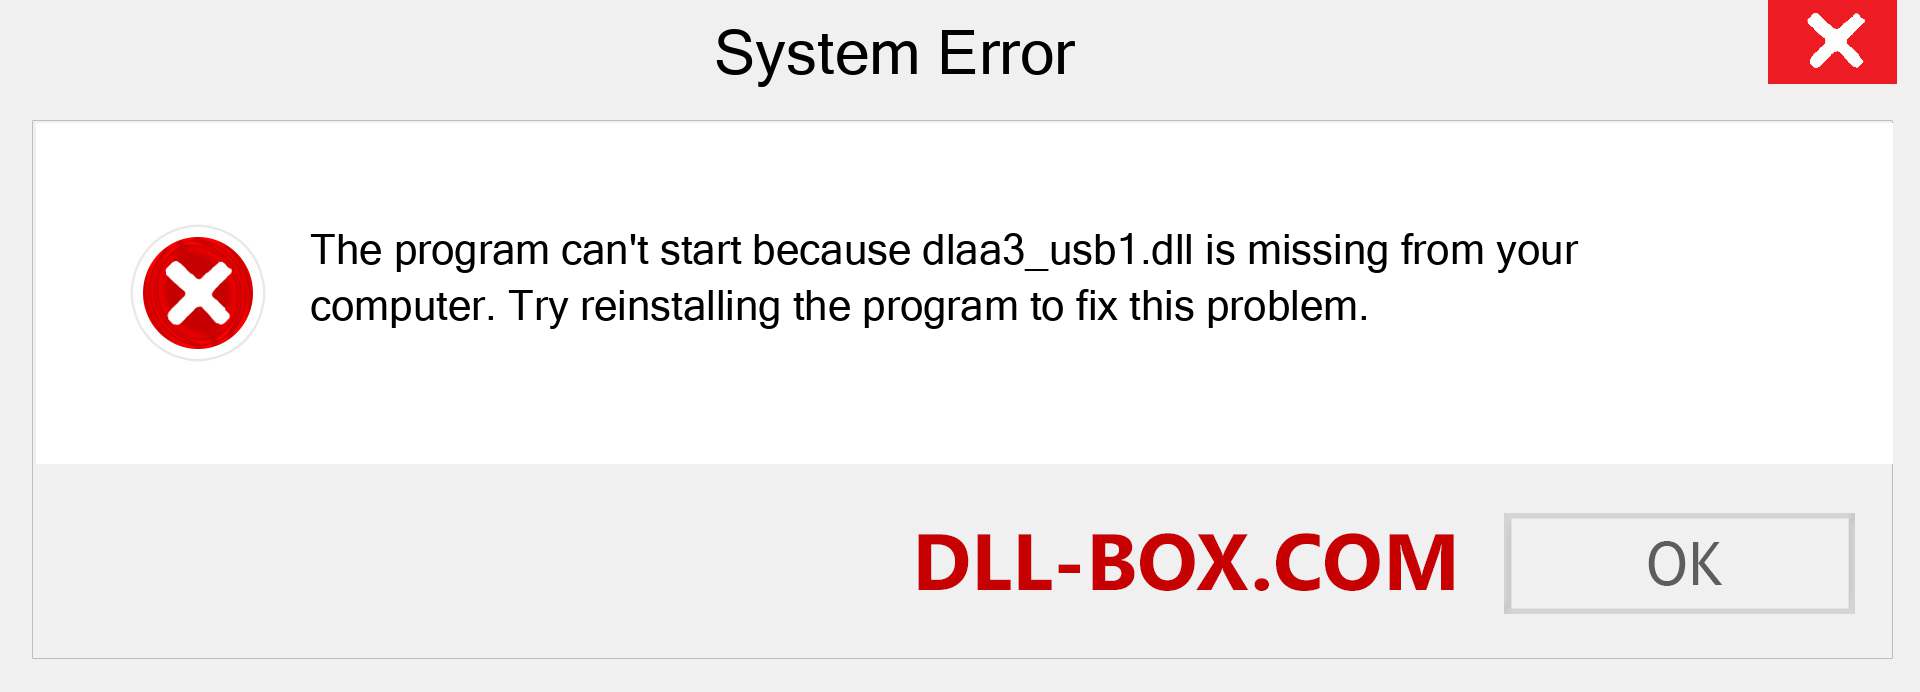  dlaa3_usb1.dll file is missing?. Download for Windows 7, 8, 10 - Fix  dlaa3_usb1 dll Missing Error on Windows, photos, images